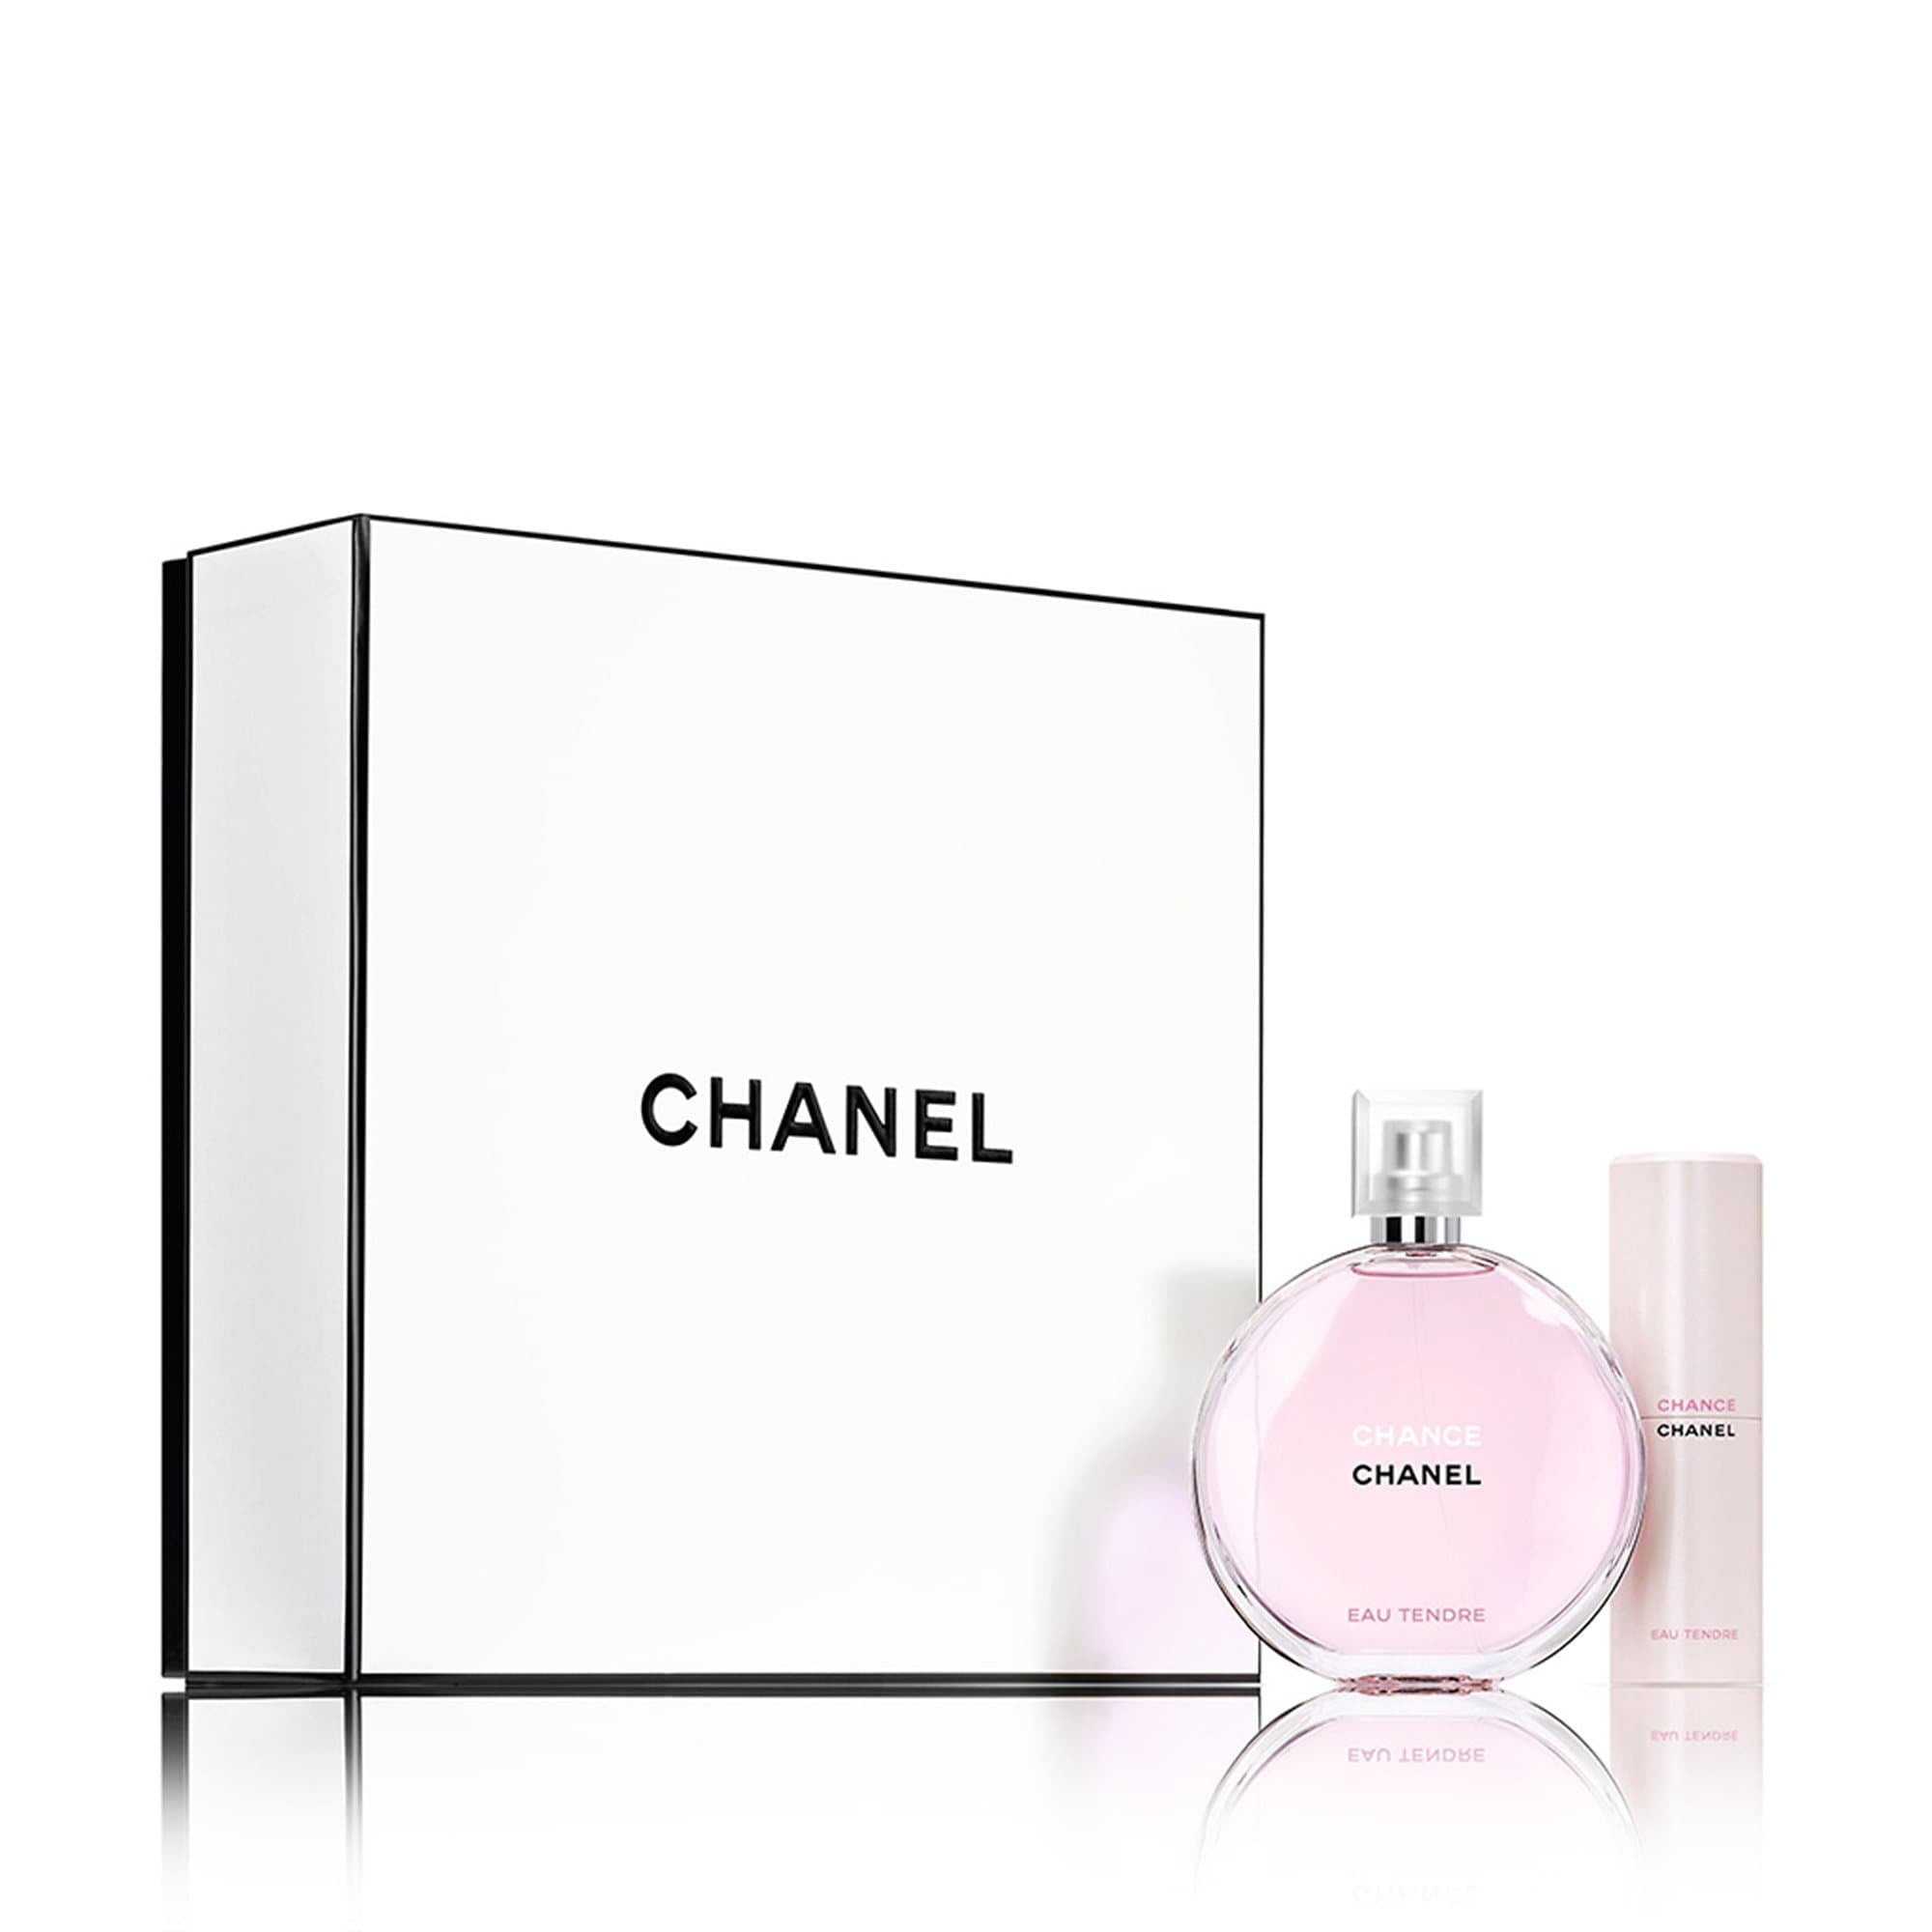 Introducir 57+ imagen chance by chanel perfume gift set - Abzlocal.mx